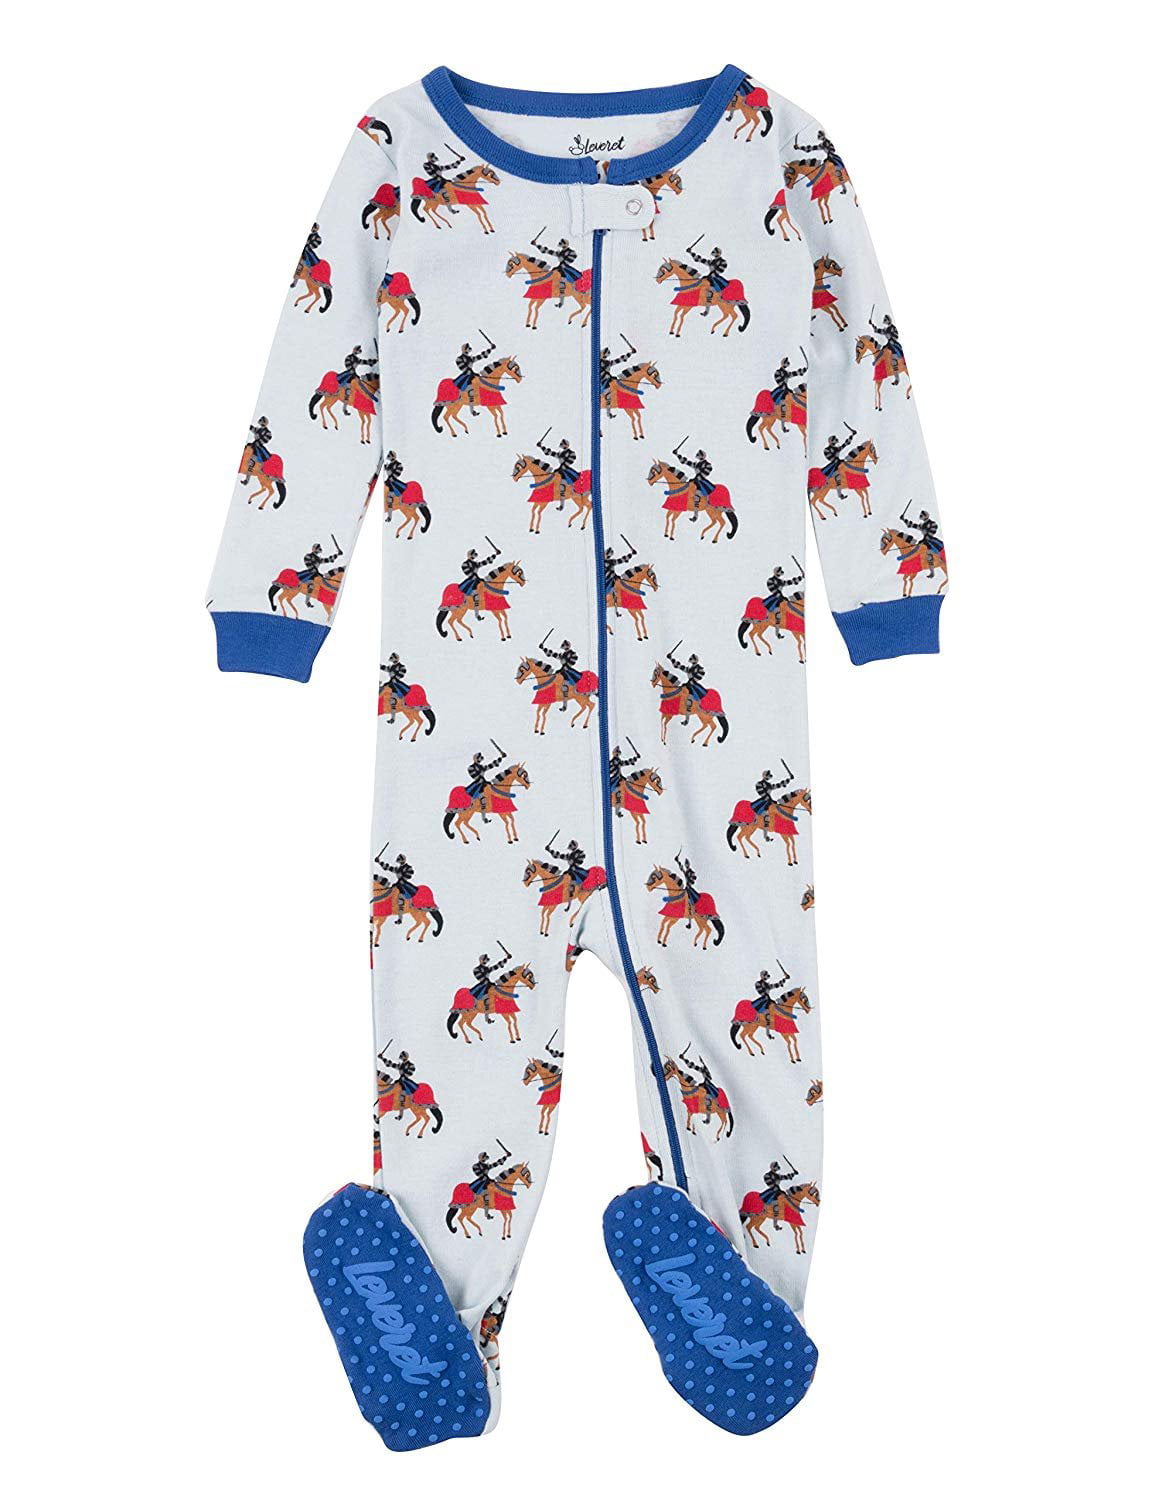 Leveret Kids Pajamas Baby Boys Girls Footed Pajamas Sleeper 100% Cotton Scuba Dive, Size 12-18 Months 